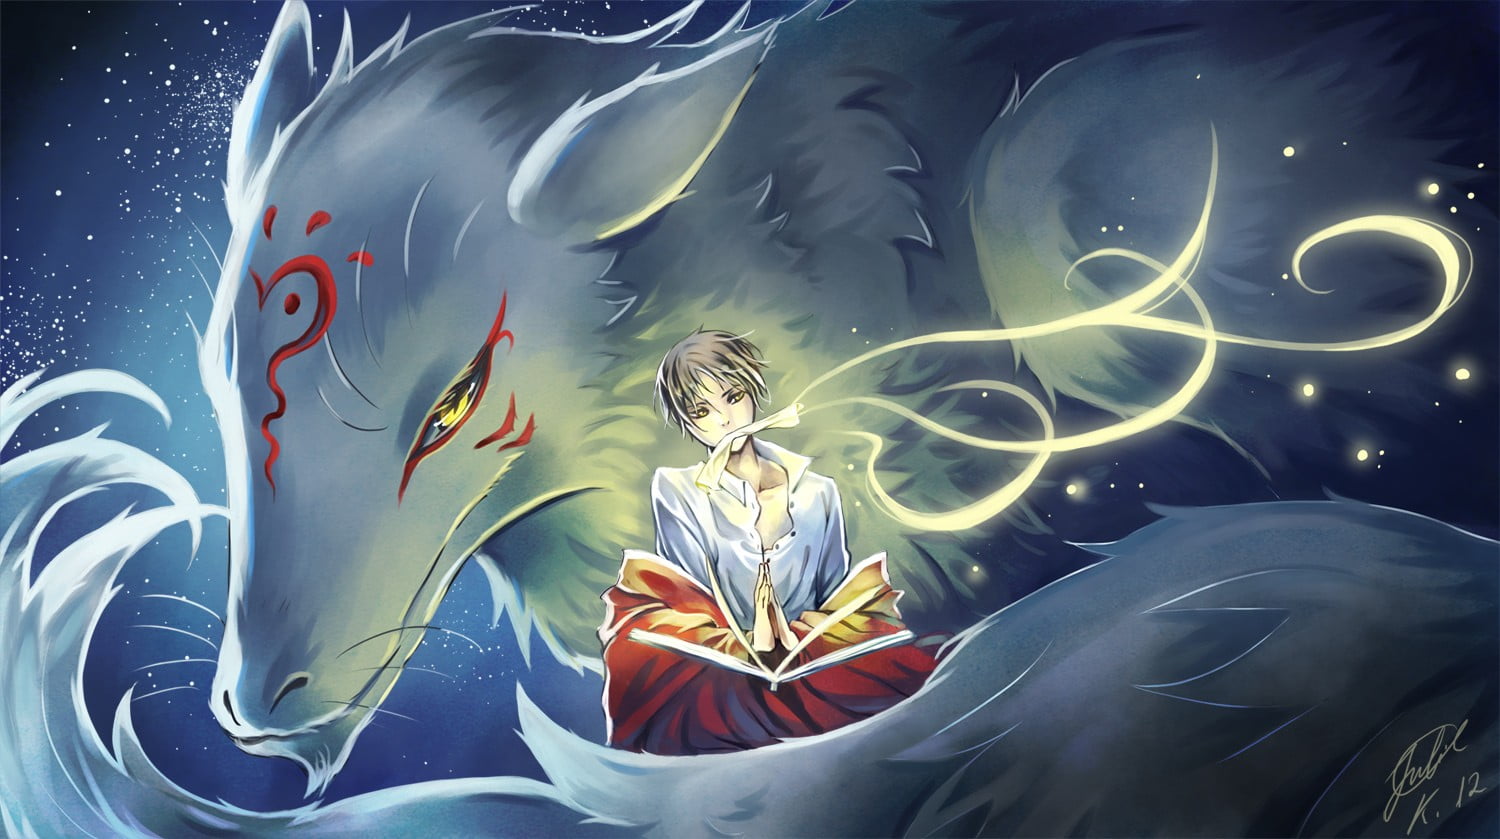 Man Sitting With White Fox On His Back Anime Digital Wallpaper Images, Photos, Reviews